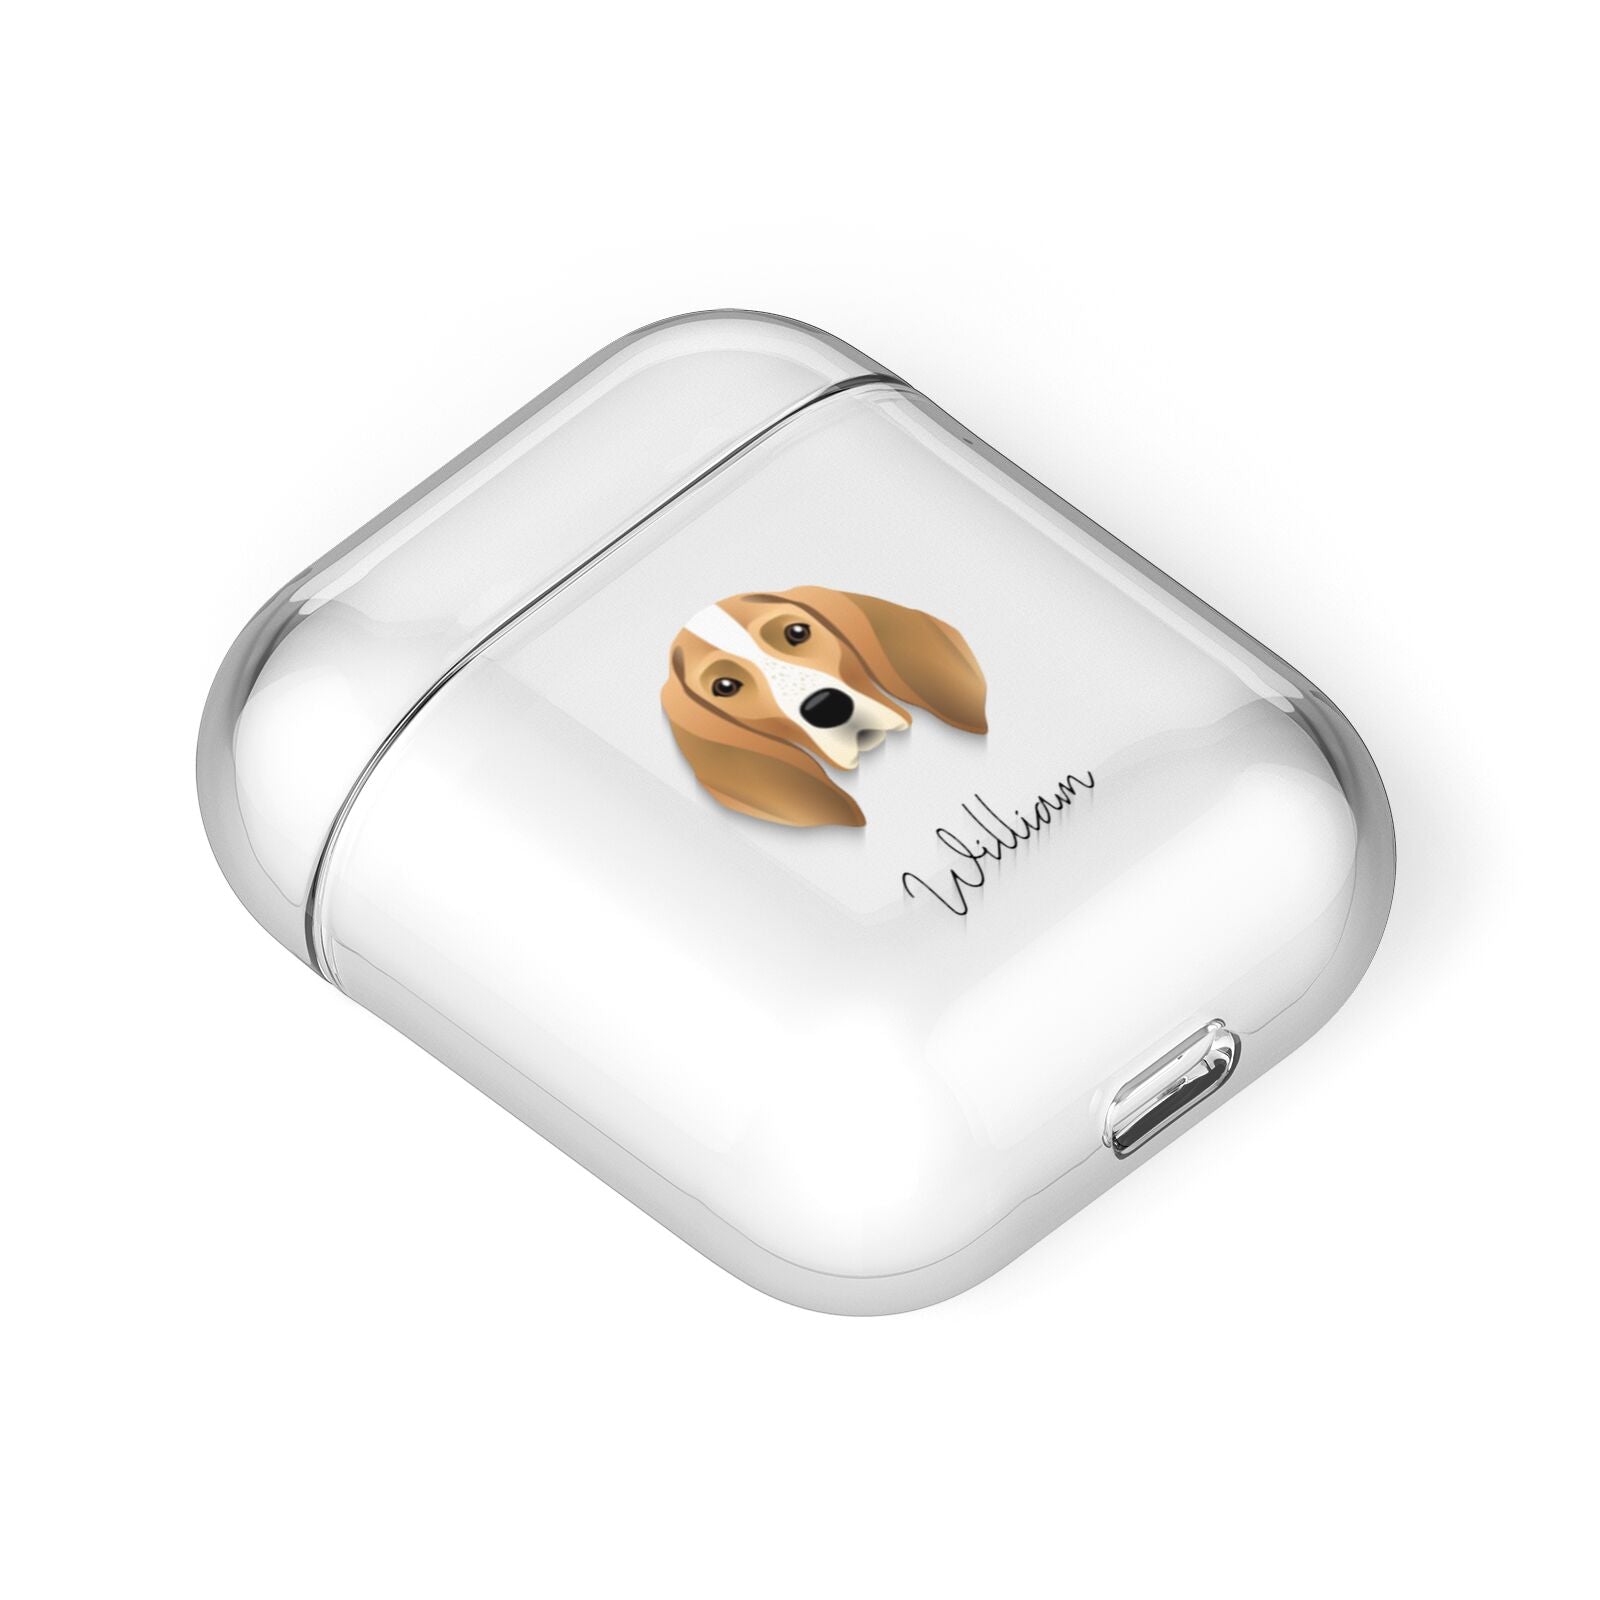 English Coonhound Personalised AirPods Case Laid Flat